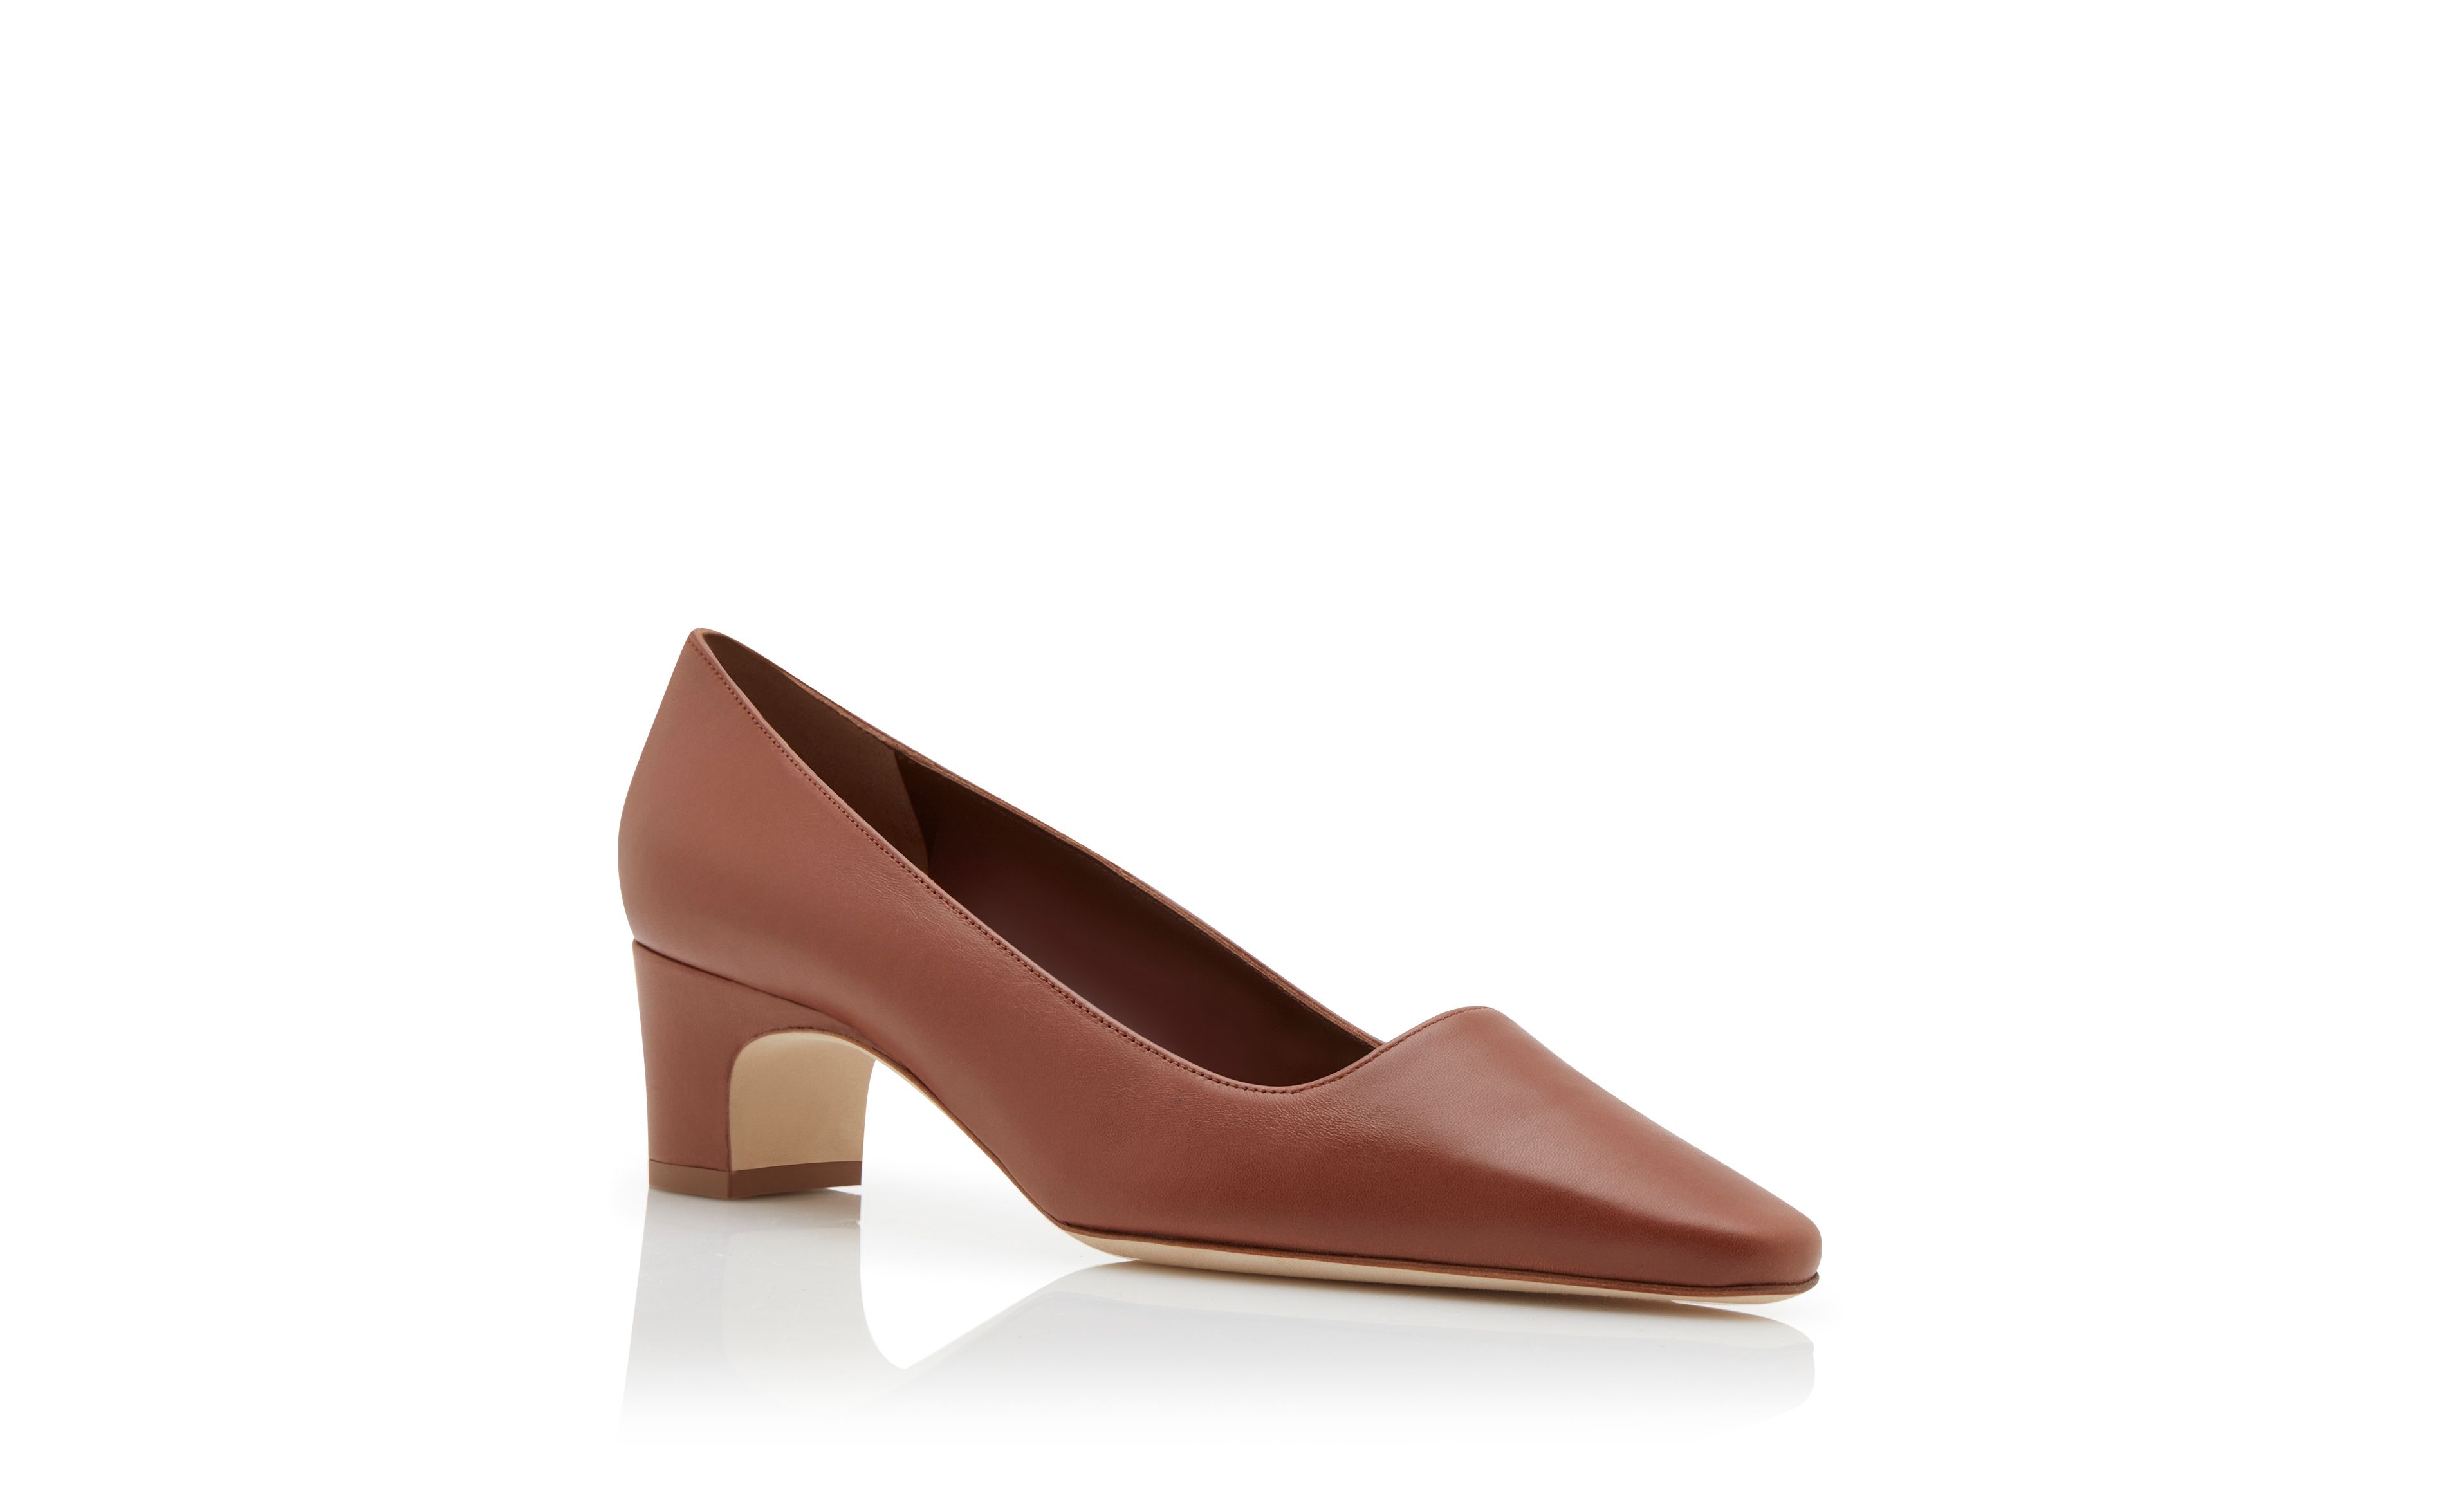 Designer Brown Nappa Leather Pumps - Image Upsell